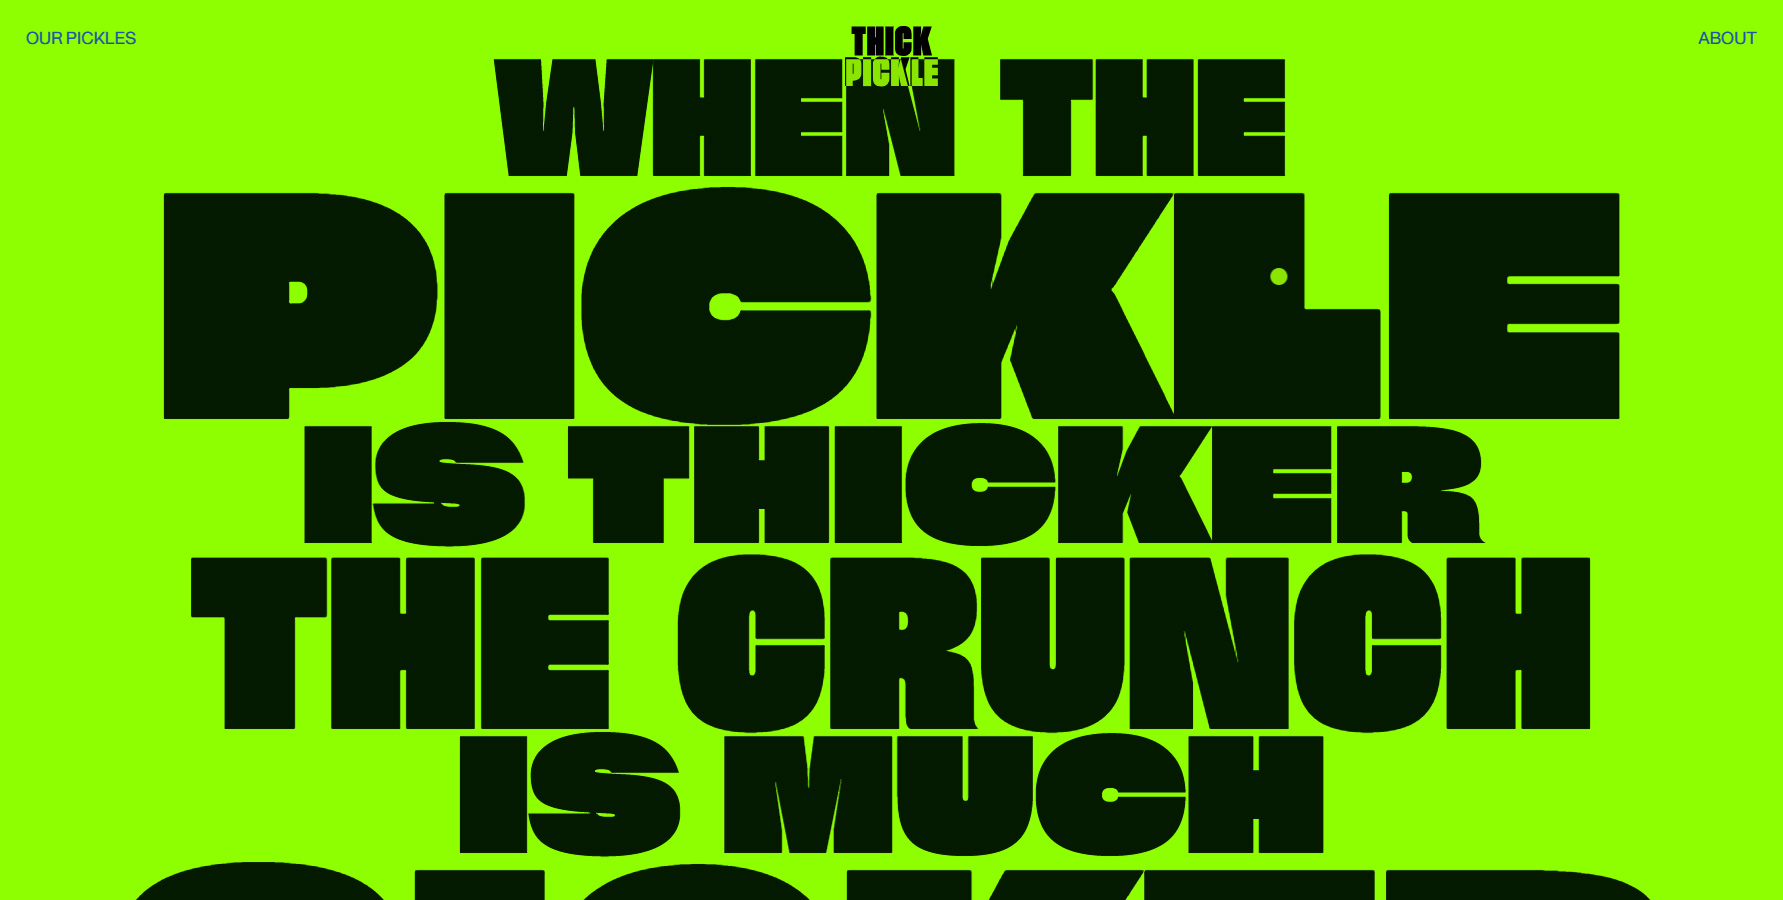 Thick Pickle - Website of the Day